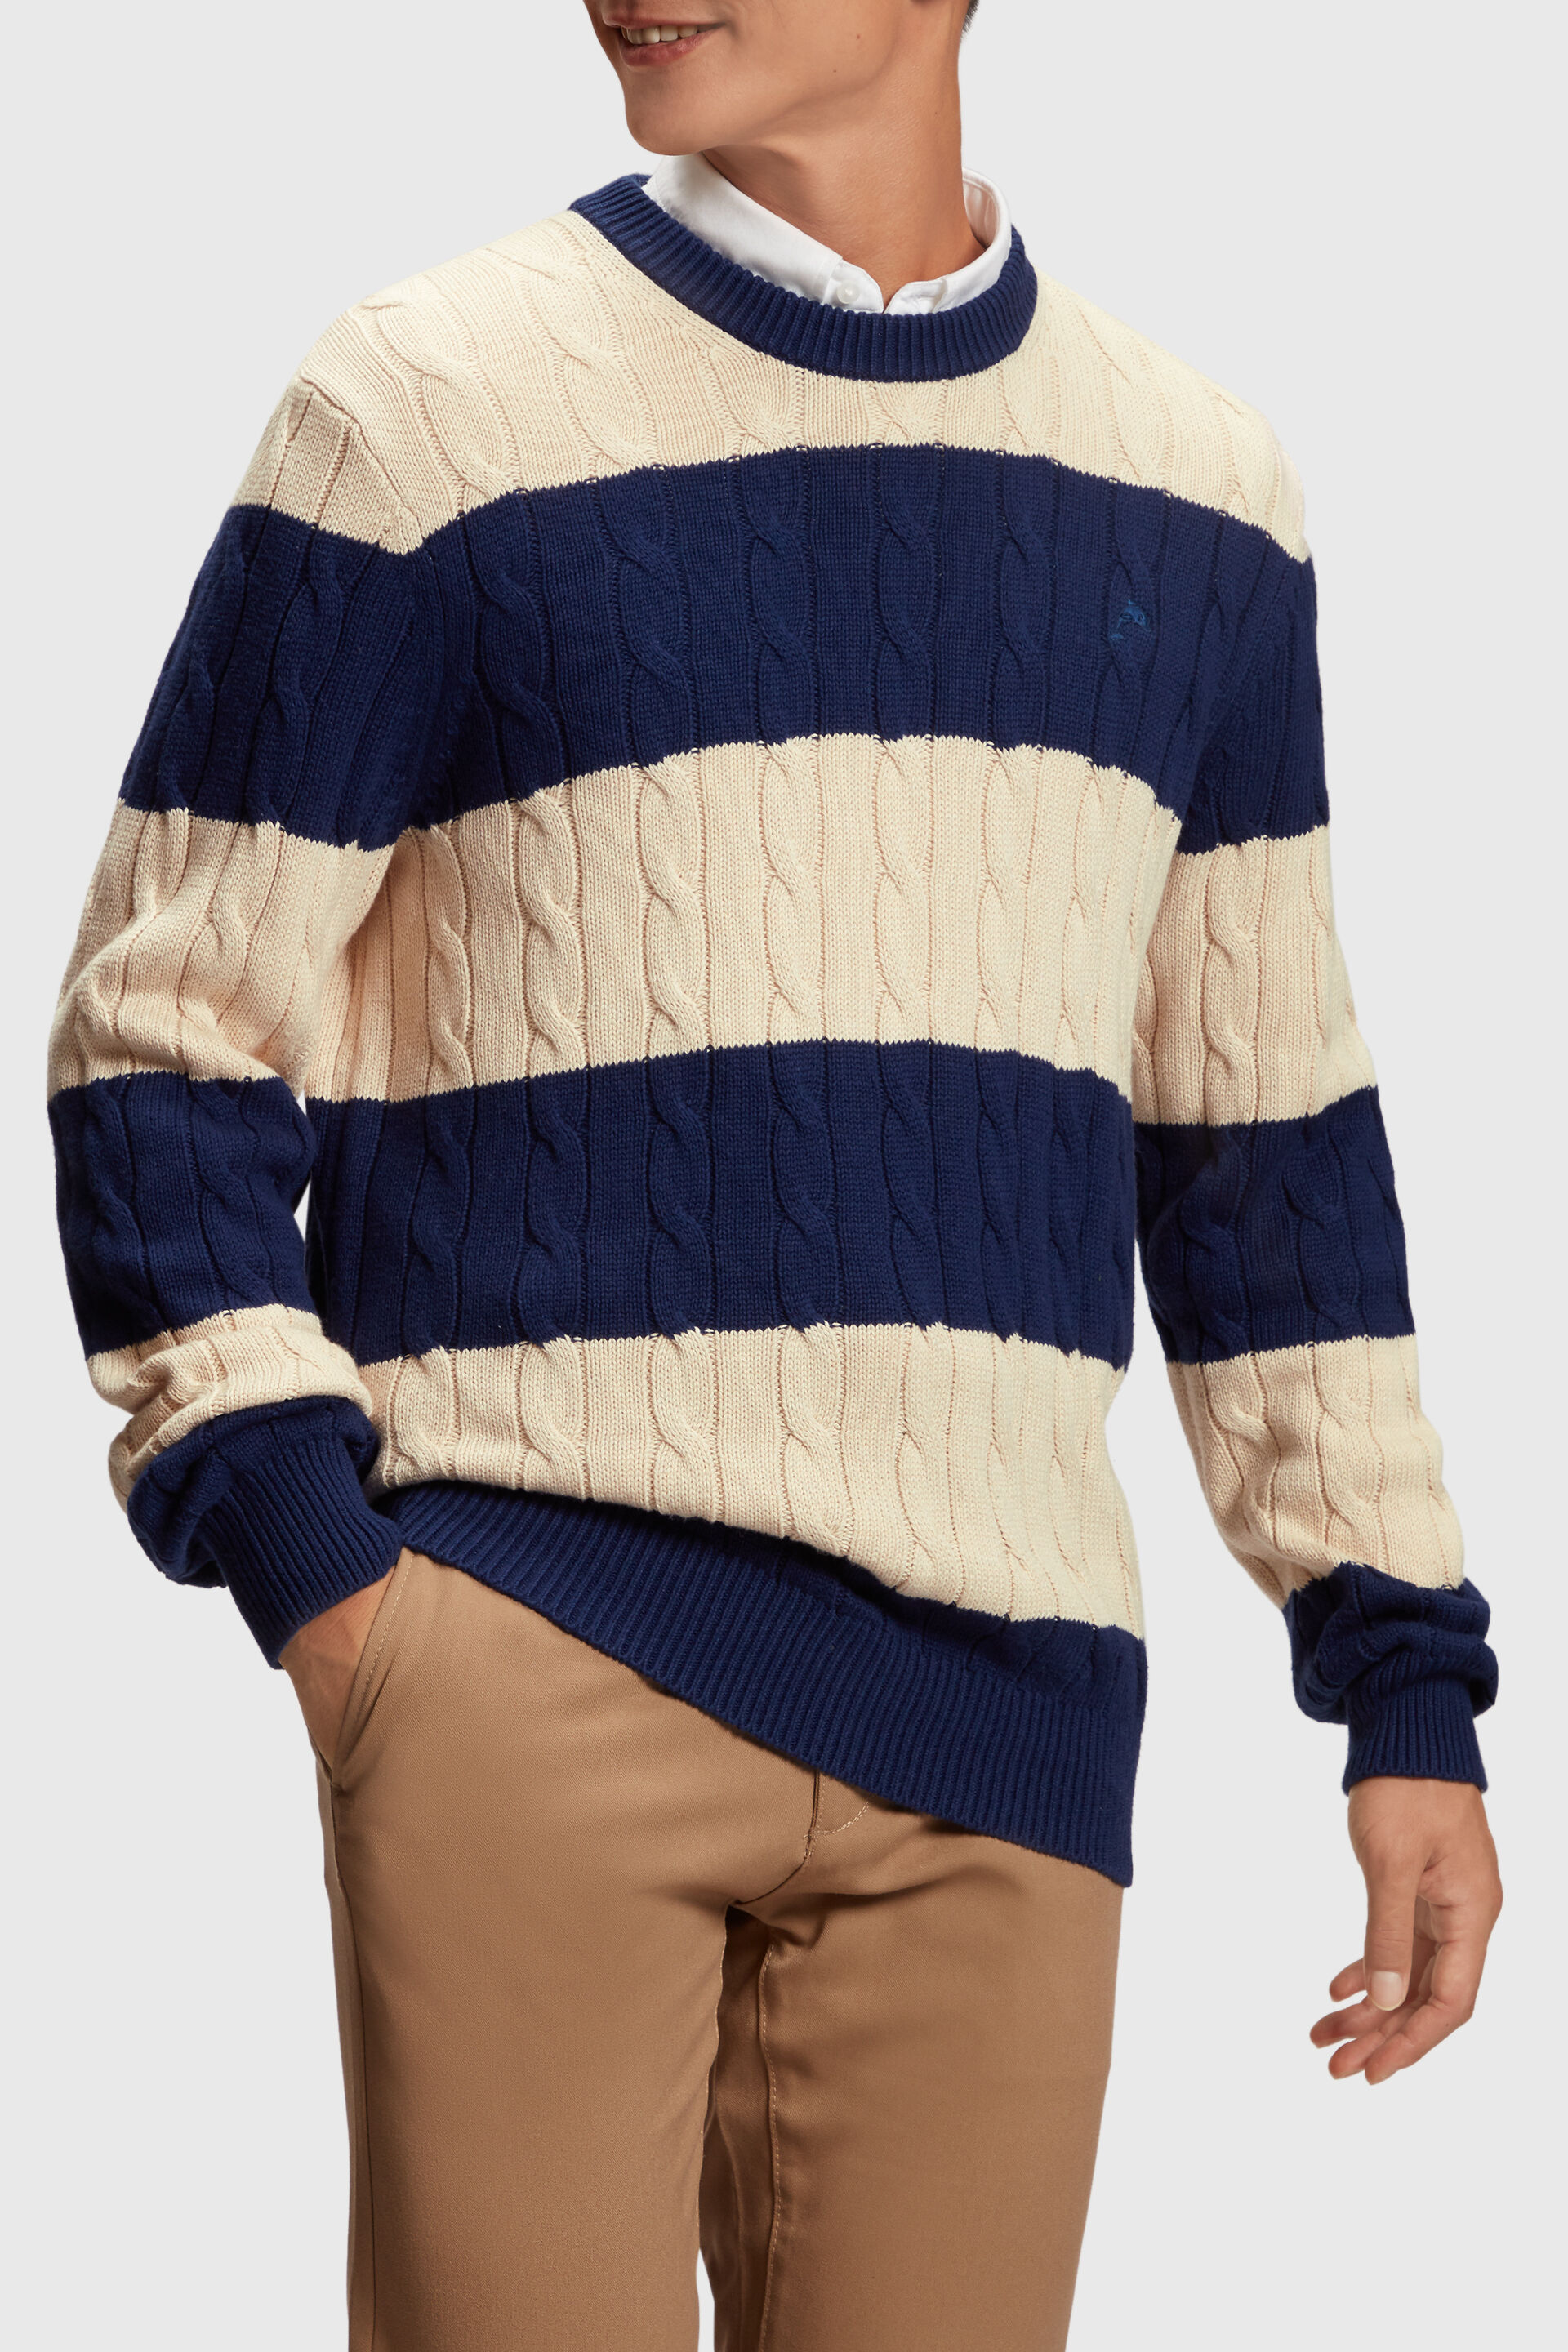 Esprit knit Striped sweater cable